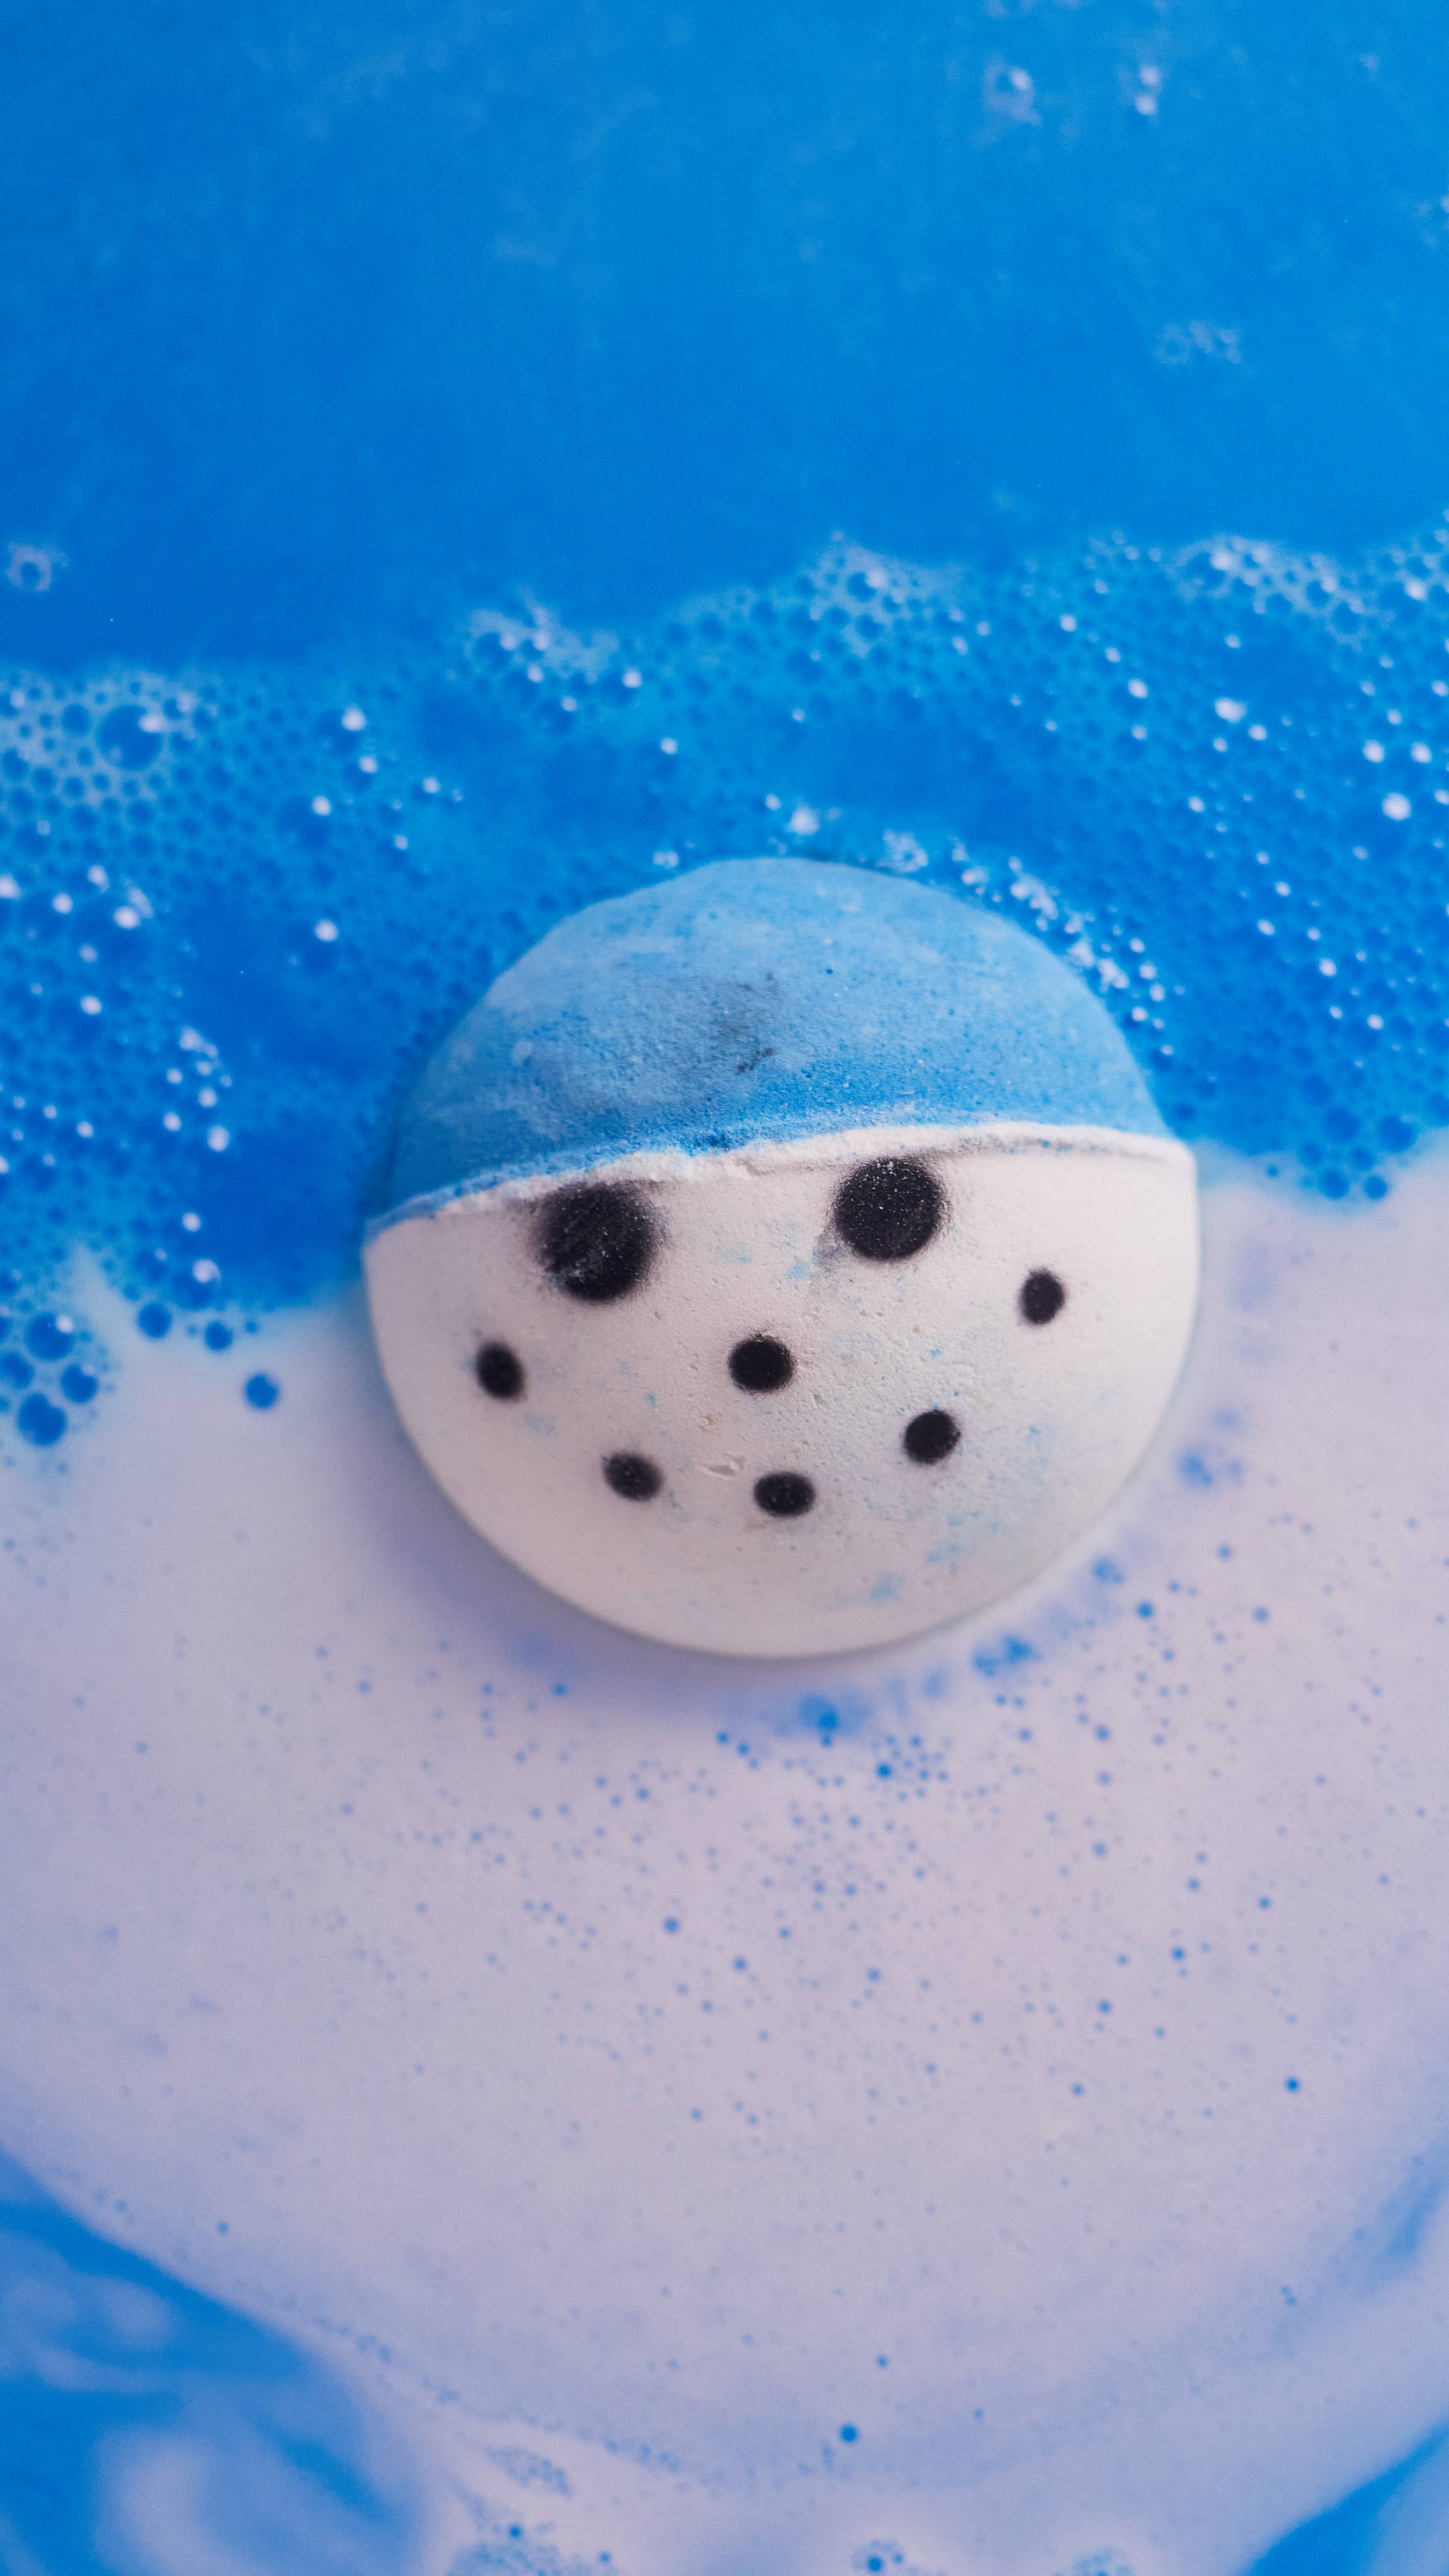 Image shows the Snowy bath bomb in the bath water surrounded by thick blue and white creamy foam.